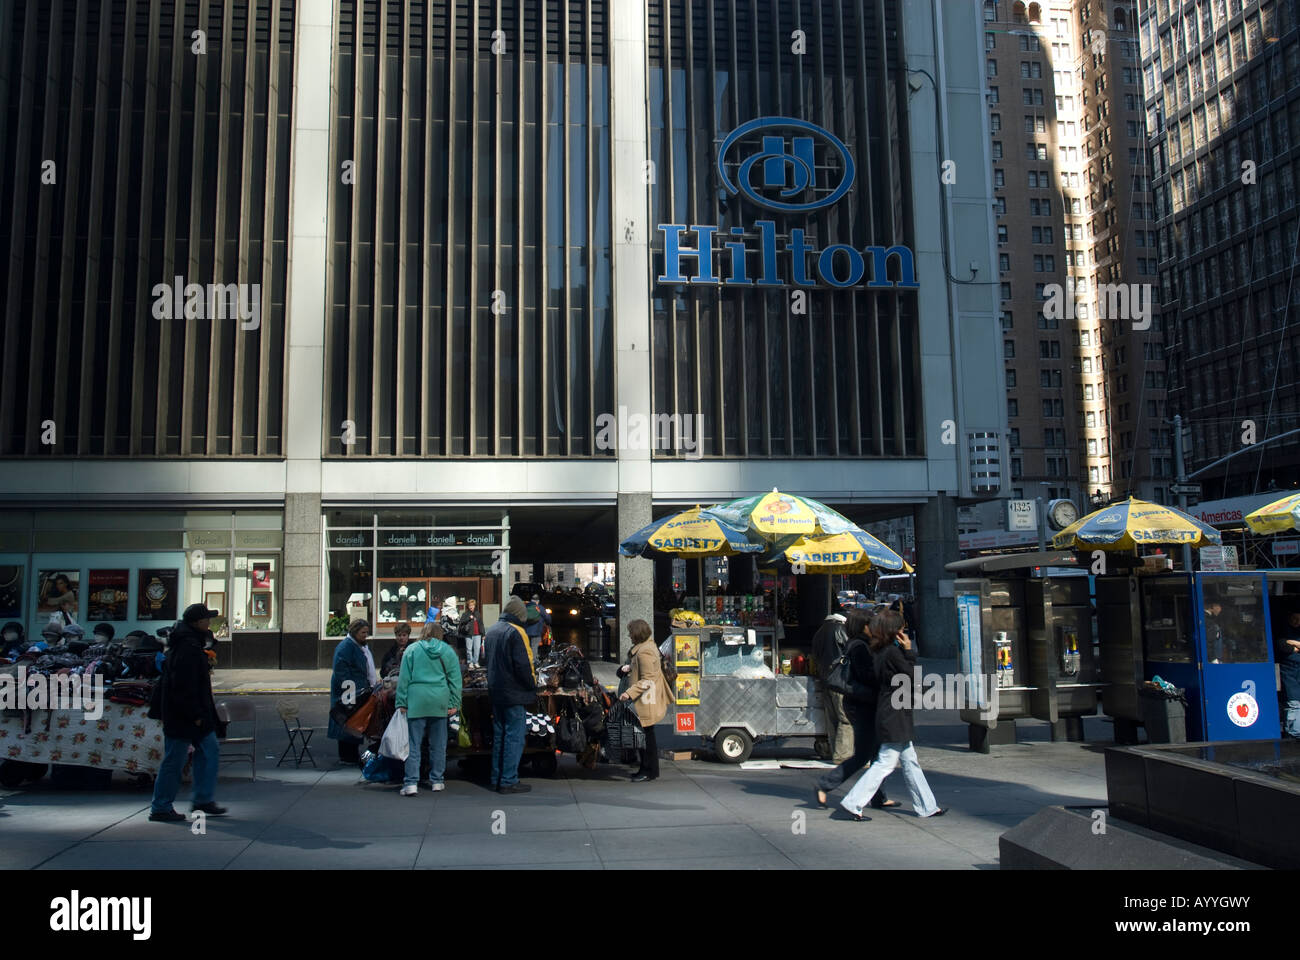 Street vendors across from the New York Hilton Hotel on Sixth Avenue in NYC Stock Photo